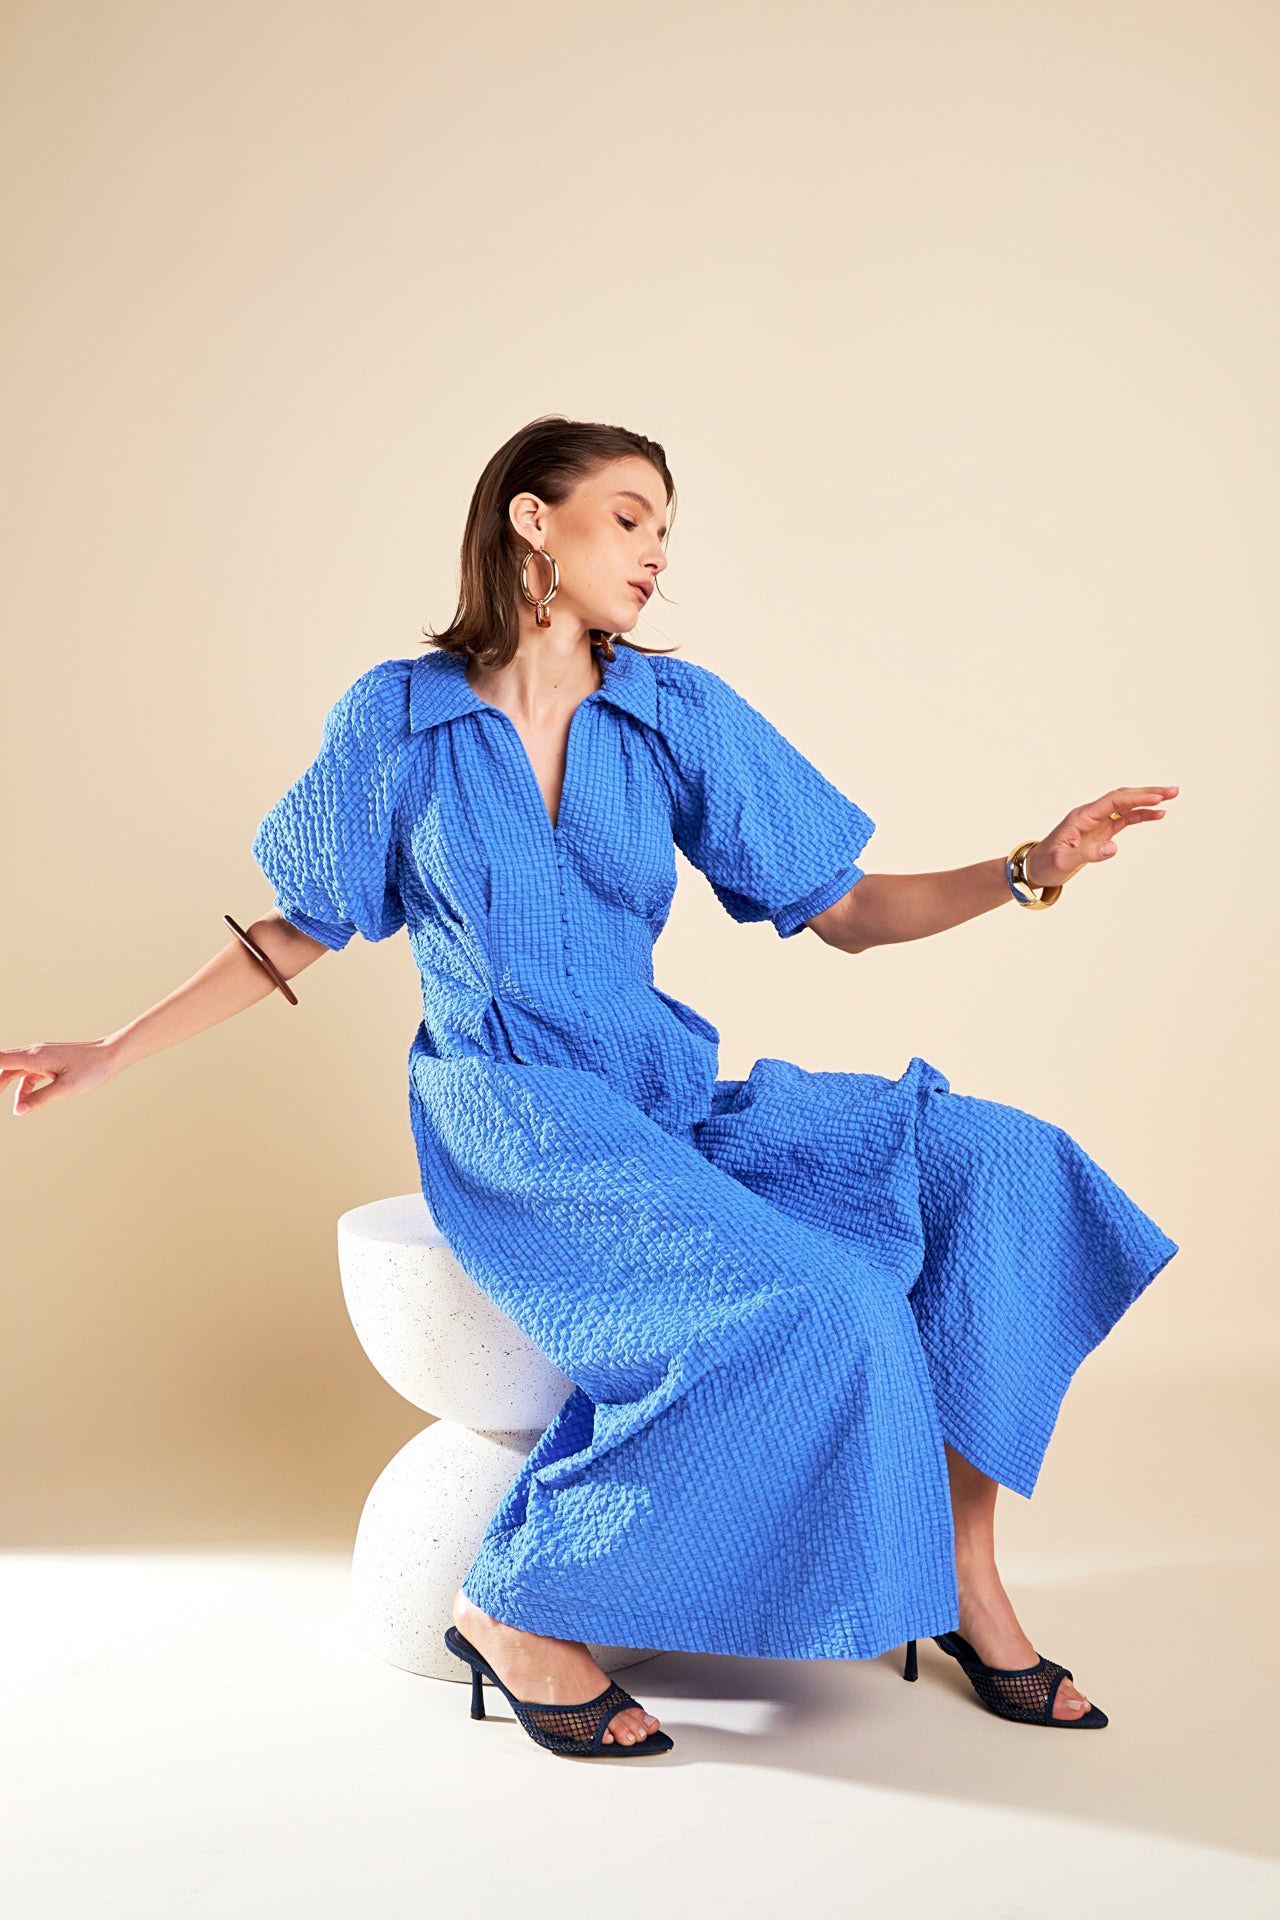 Discover our Shirt Midi Dress featured in our latest editorial, "Crafted Contours: Where Fashion Meets Art"